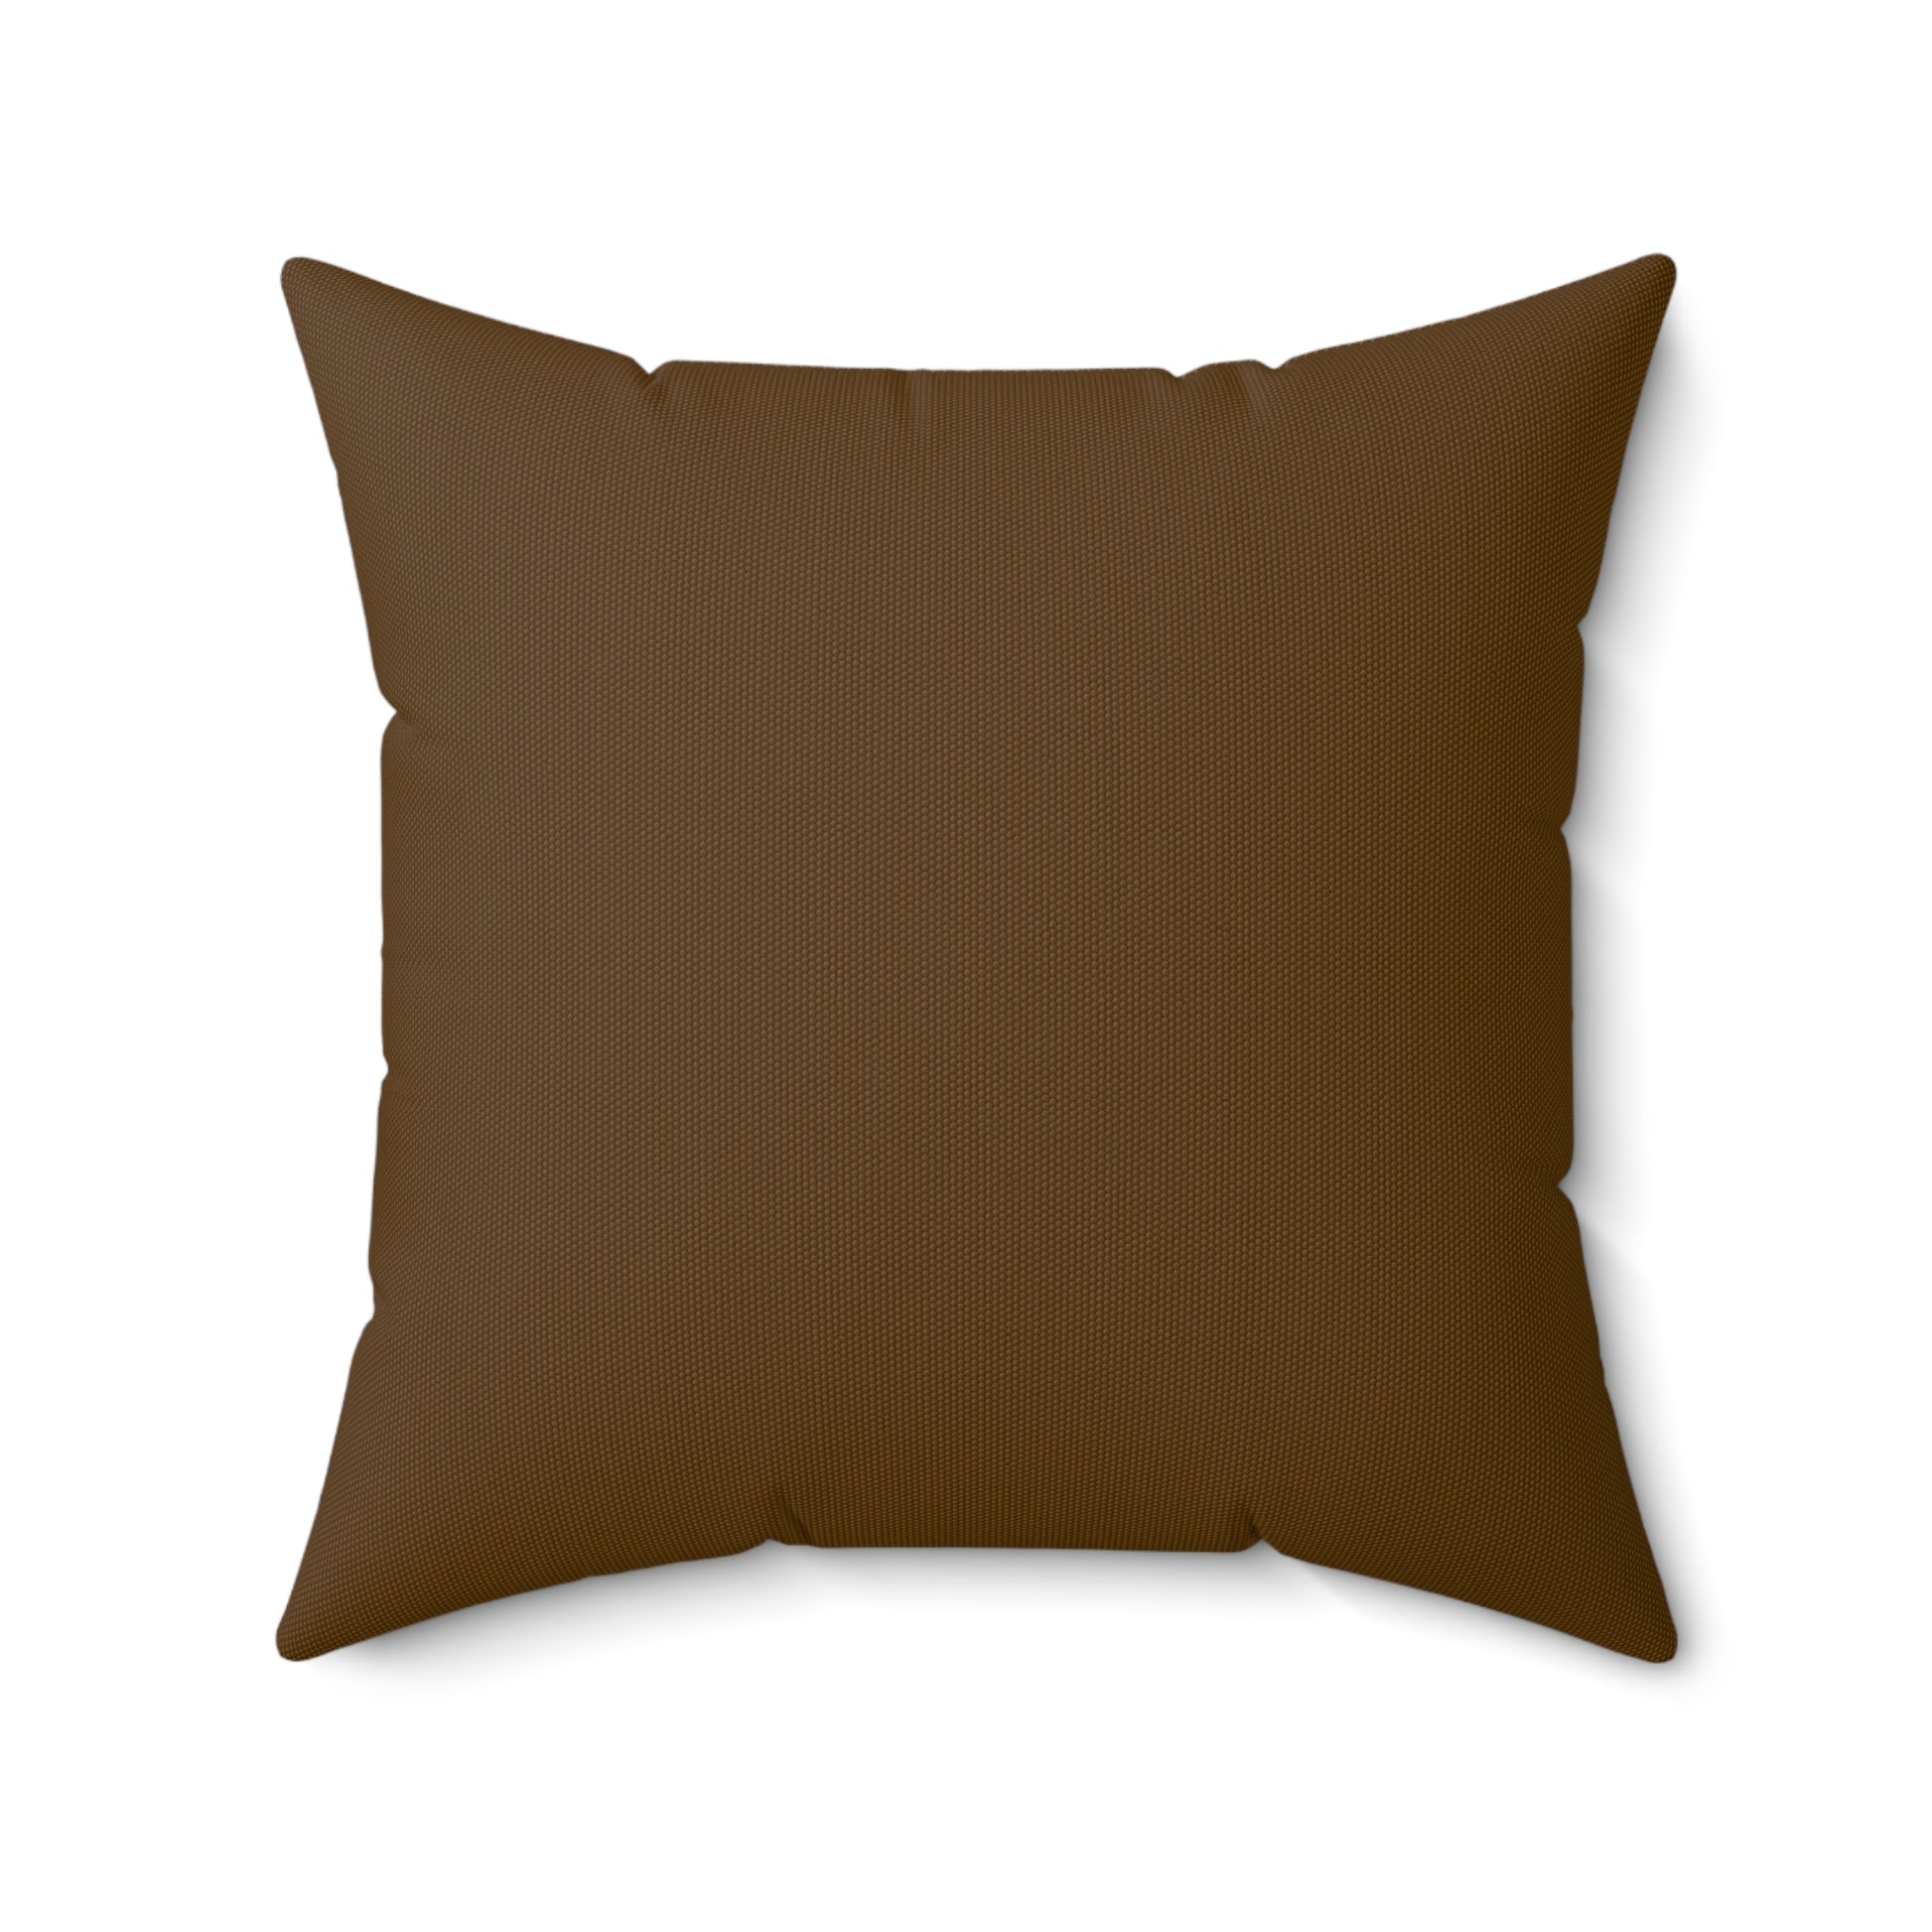 Personalized Dog Lover Memorial Huggable Spun Polyester Square Pillow